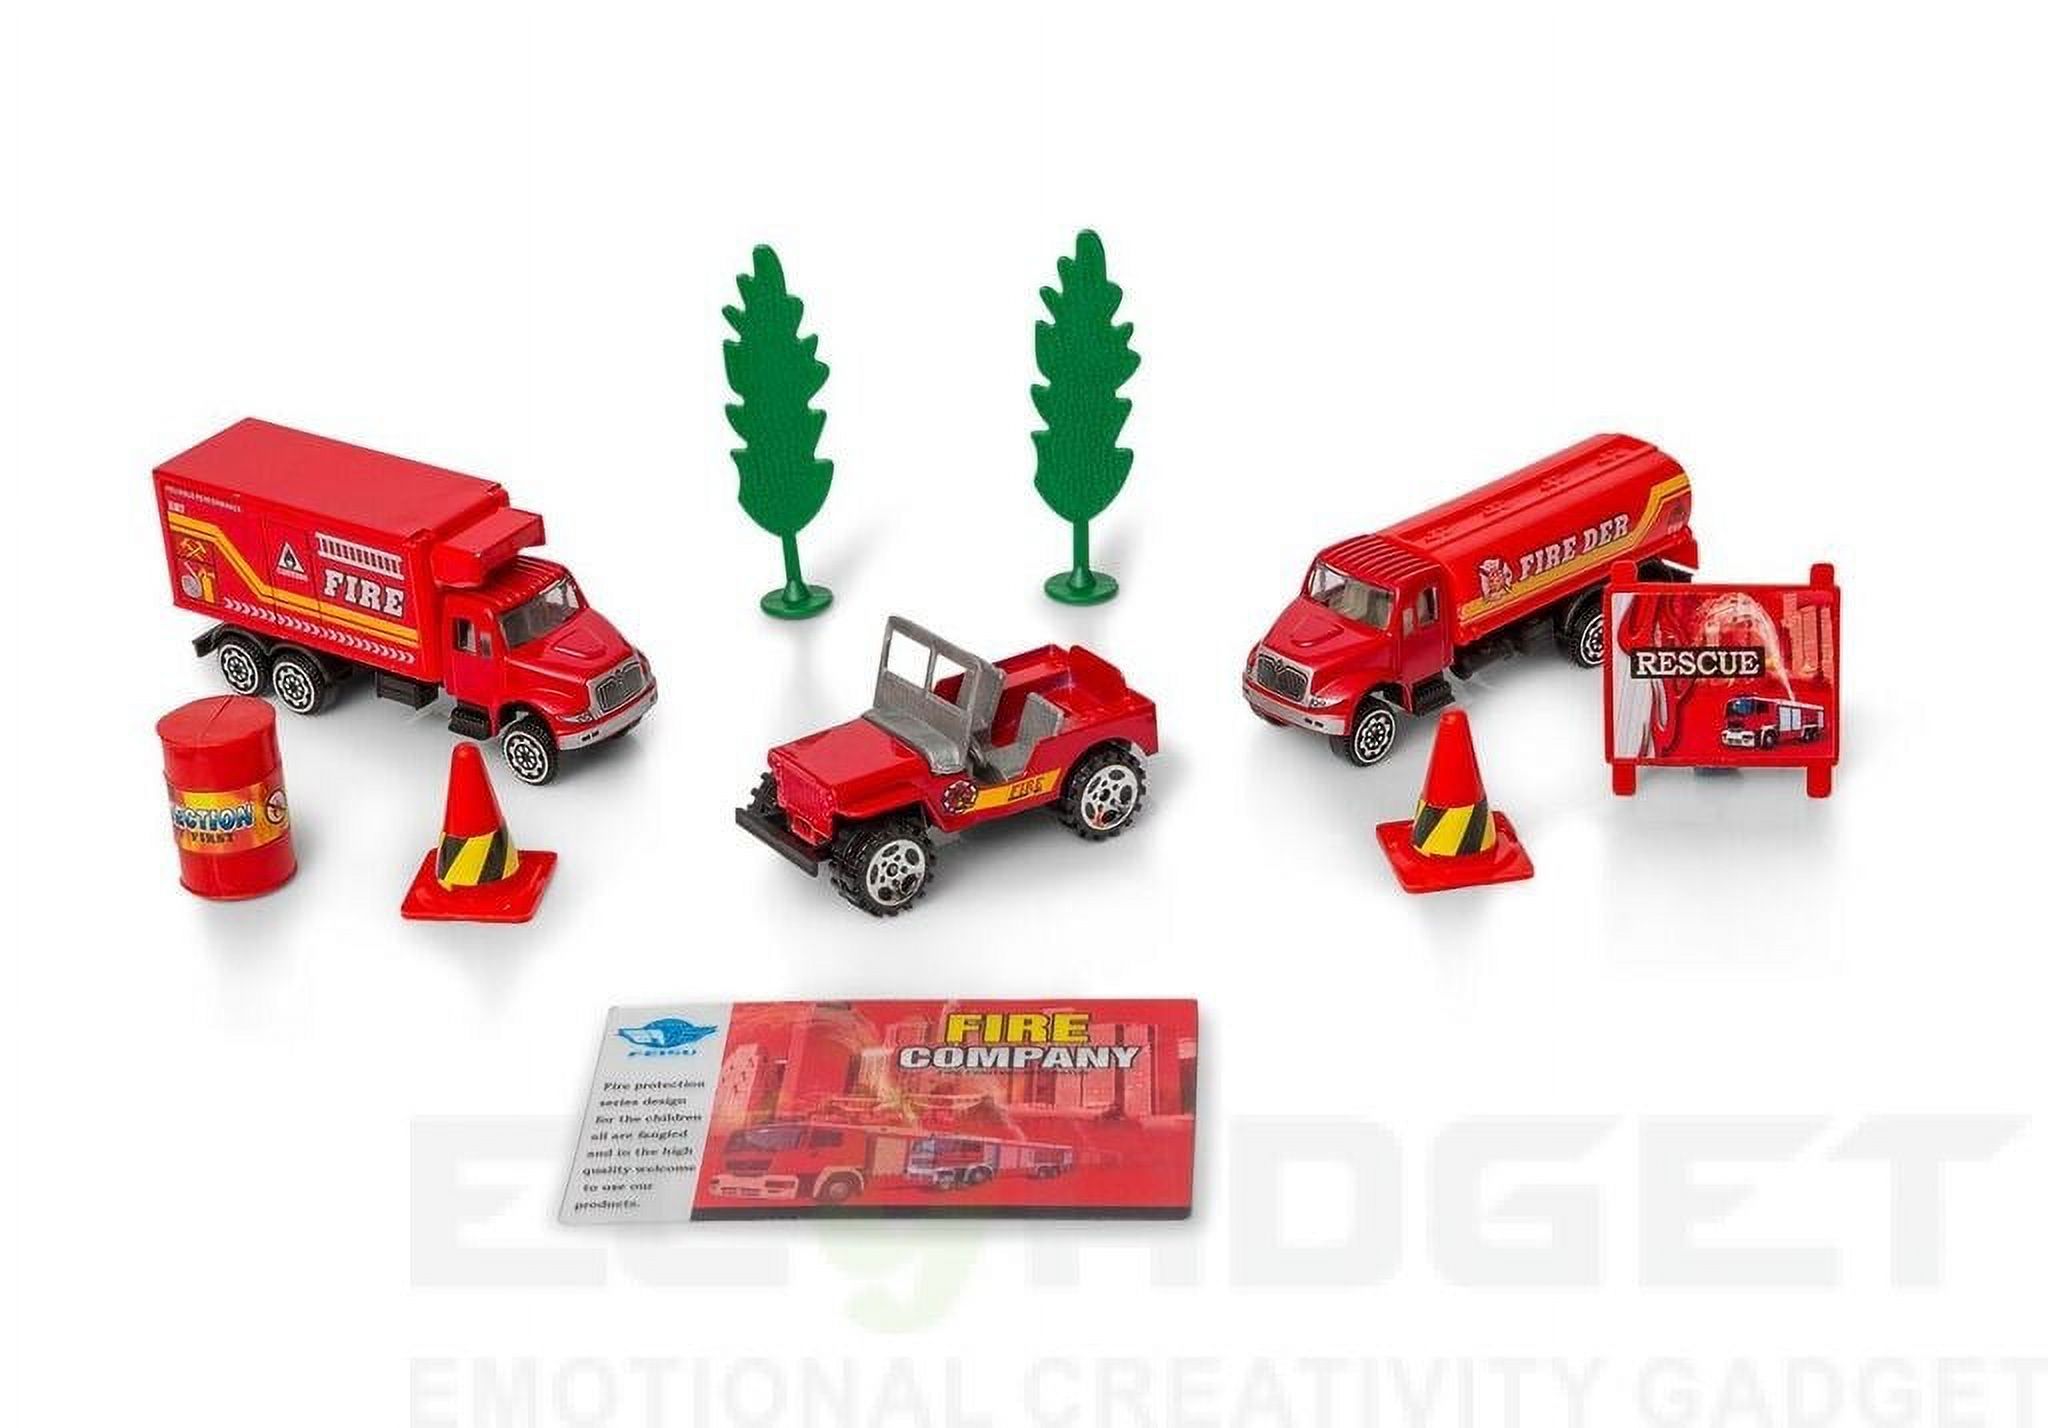 Big-Daddy Fire Rescue Toy Play Set Starter Kit Includes More Than 10 Fire Truck Toys And Accessories To Create The Perfect Emergency Scene - image 3 of 7